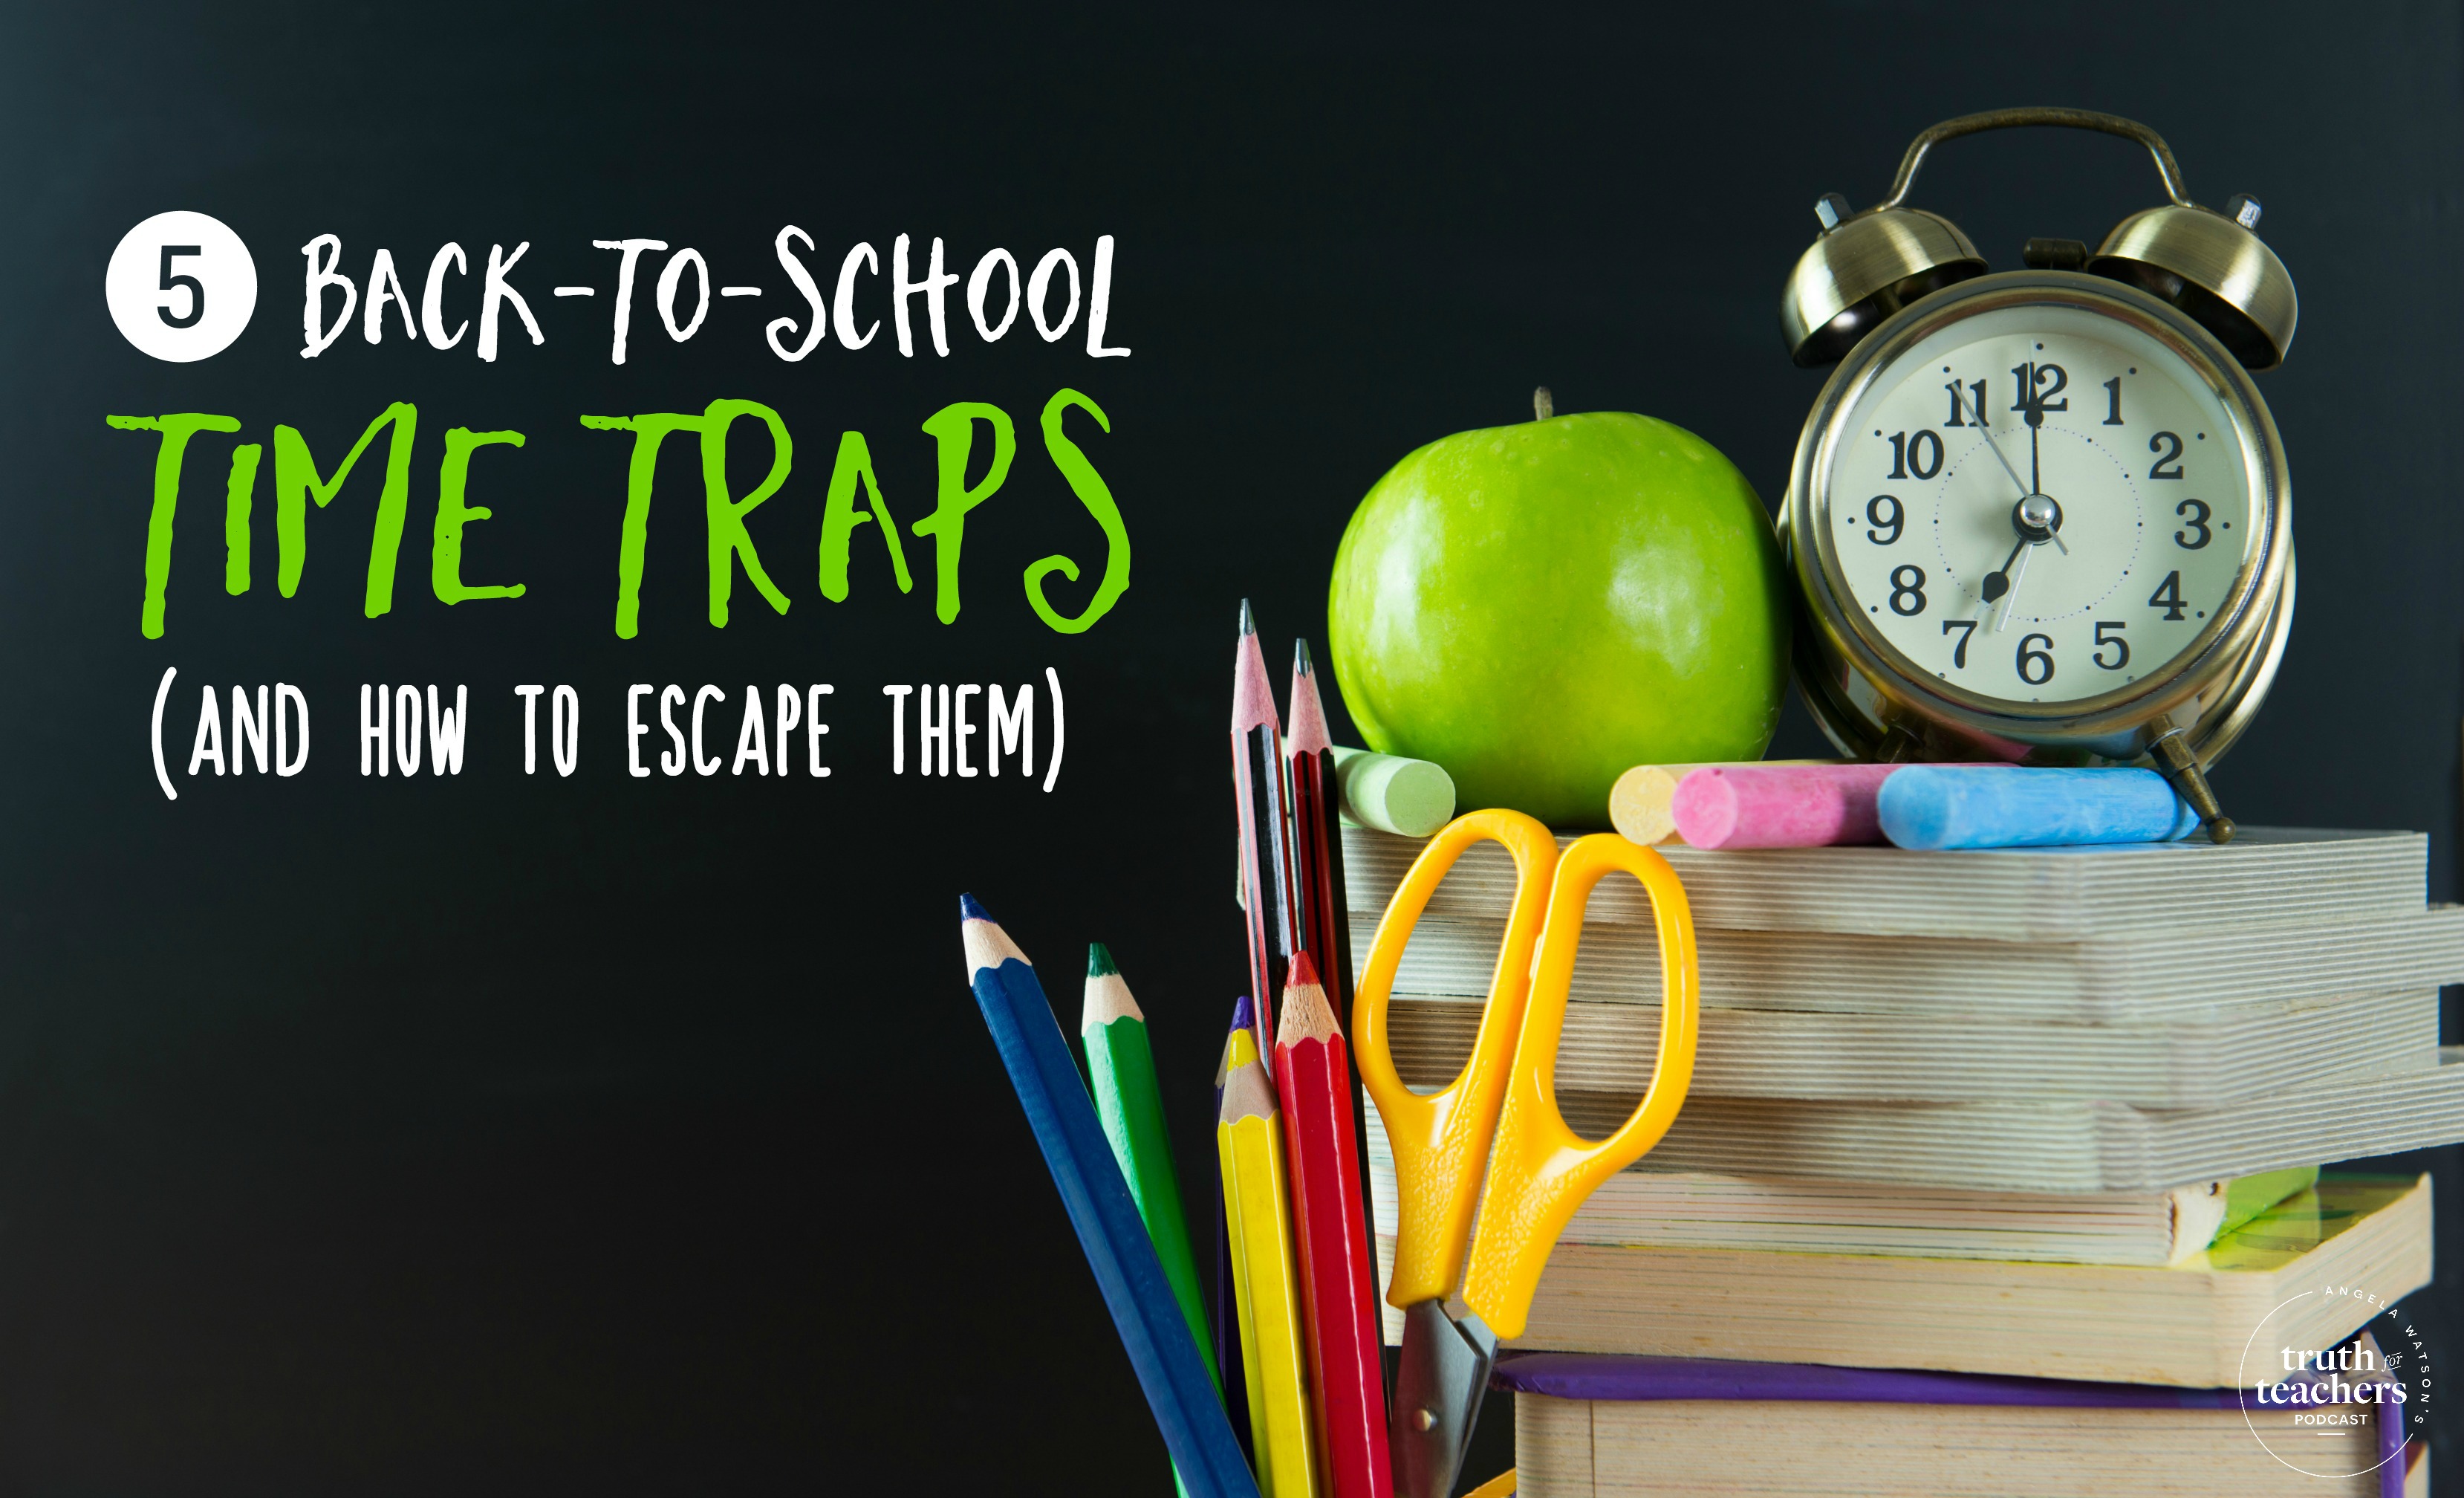 5 back-to-school time traps (and how to escape them)